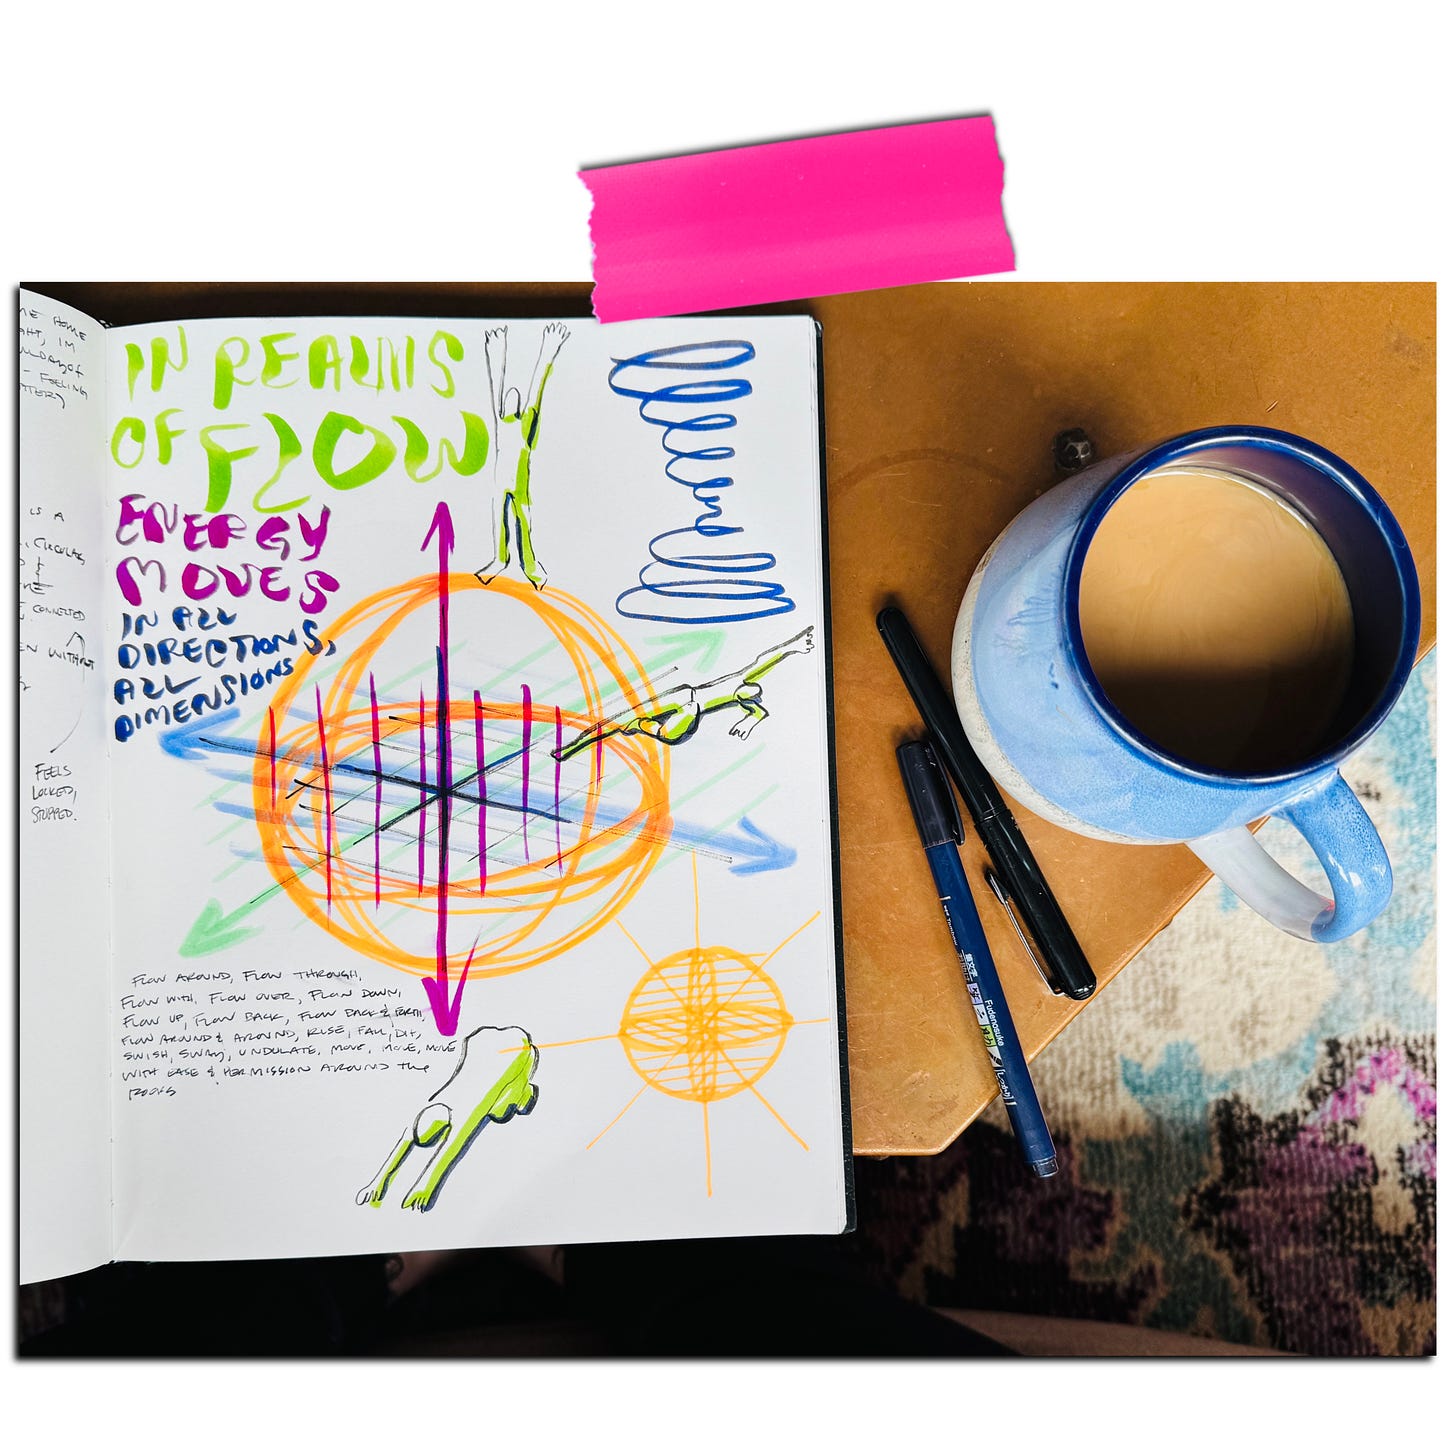 Artist Lisette Murphy’s sketchbook is open on a copper coffee table next to a cup of coffee and a couple pens. On the page is written, “in realms of flow energy moves in all directions, all dimensions. Flow around flow through flow with flow over flow down flow up flow back…move with ease and permission around the rocks”